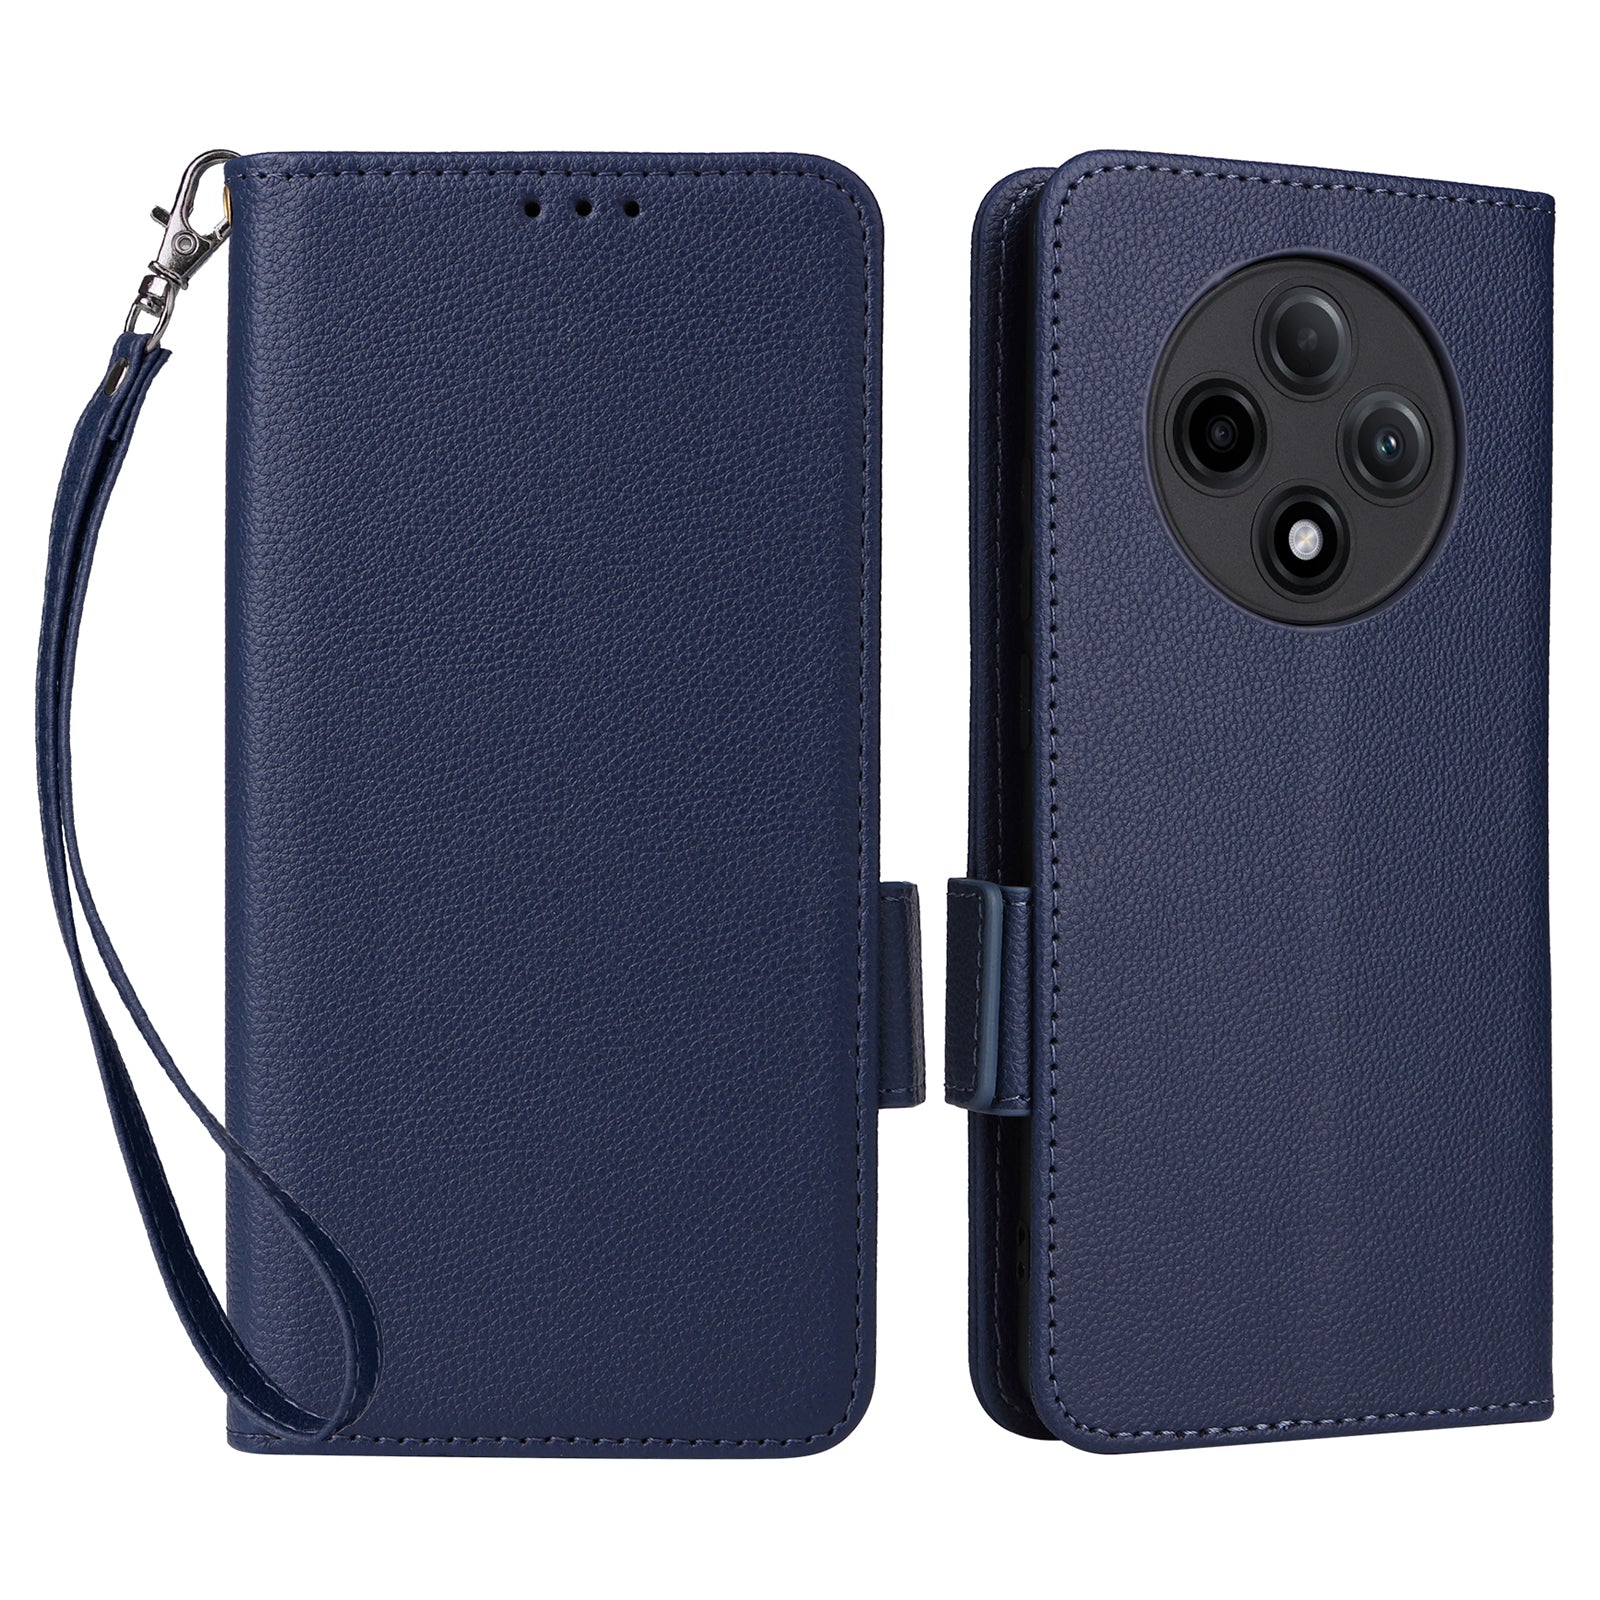 For Oppo A3 Pro 5G Case Leather Phone Cover Mobile Accessories Wholesale Supplier - Dark Blue